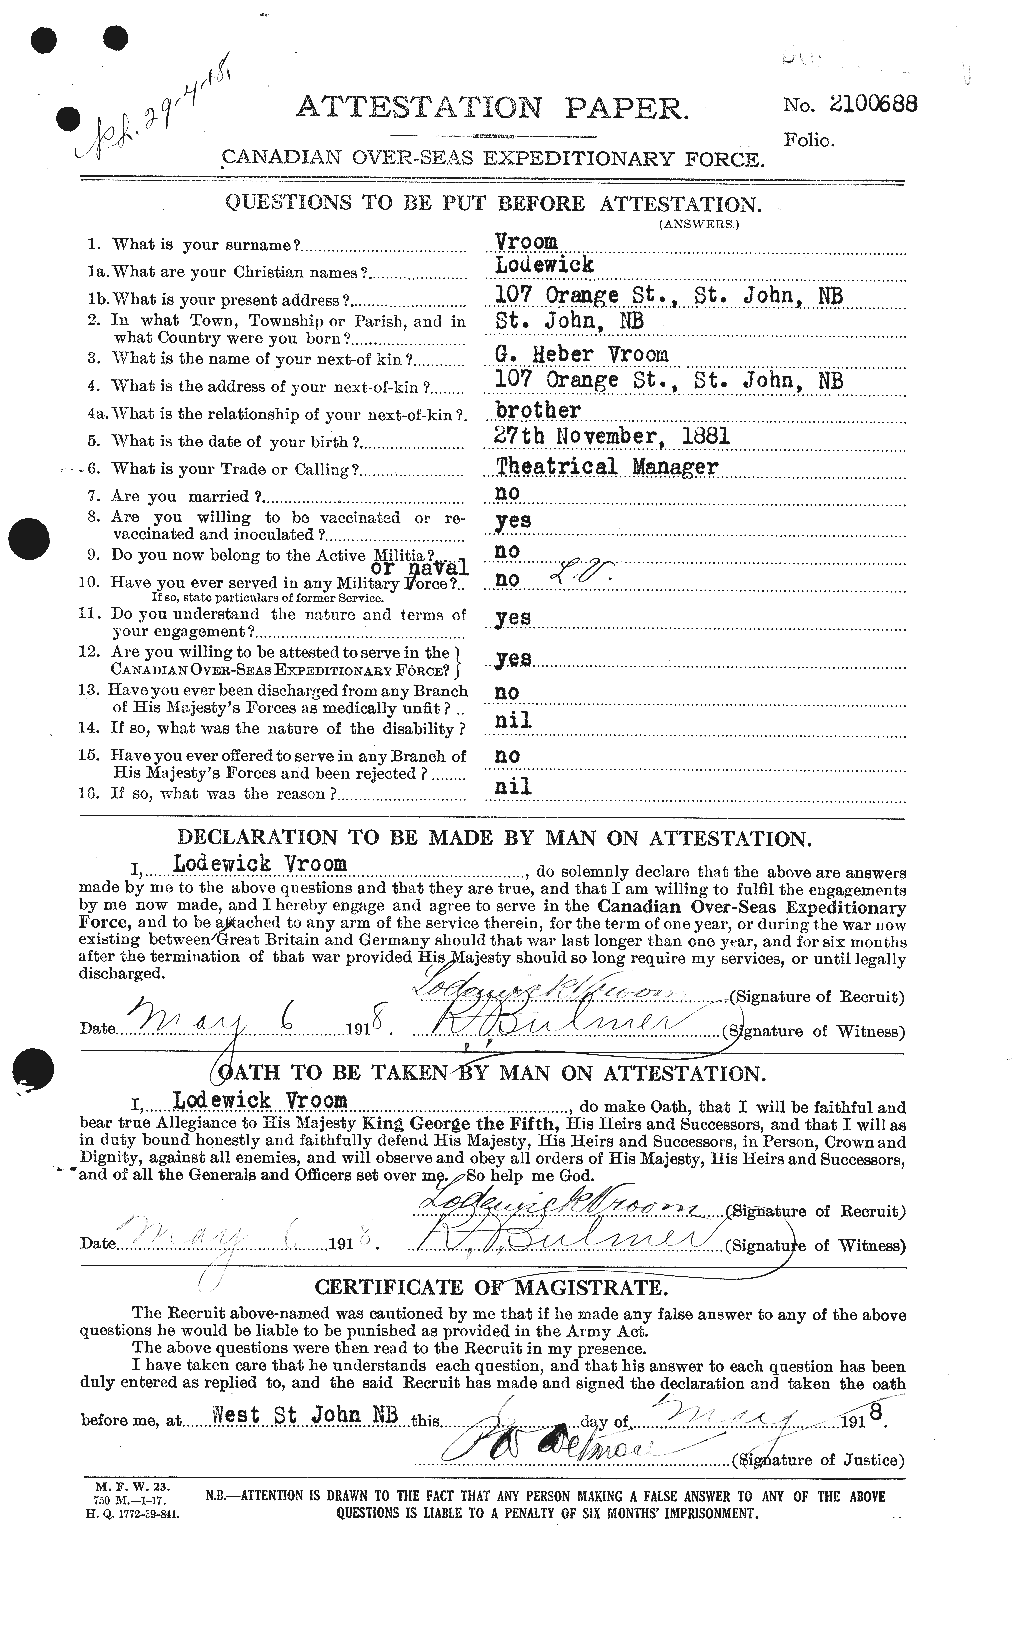 Personnel Records of the First World War - CEF 652528a